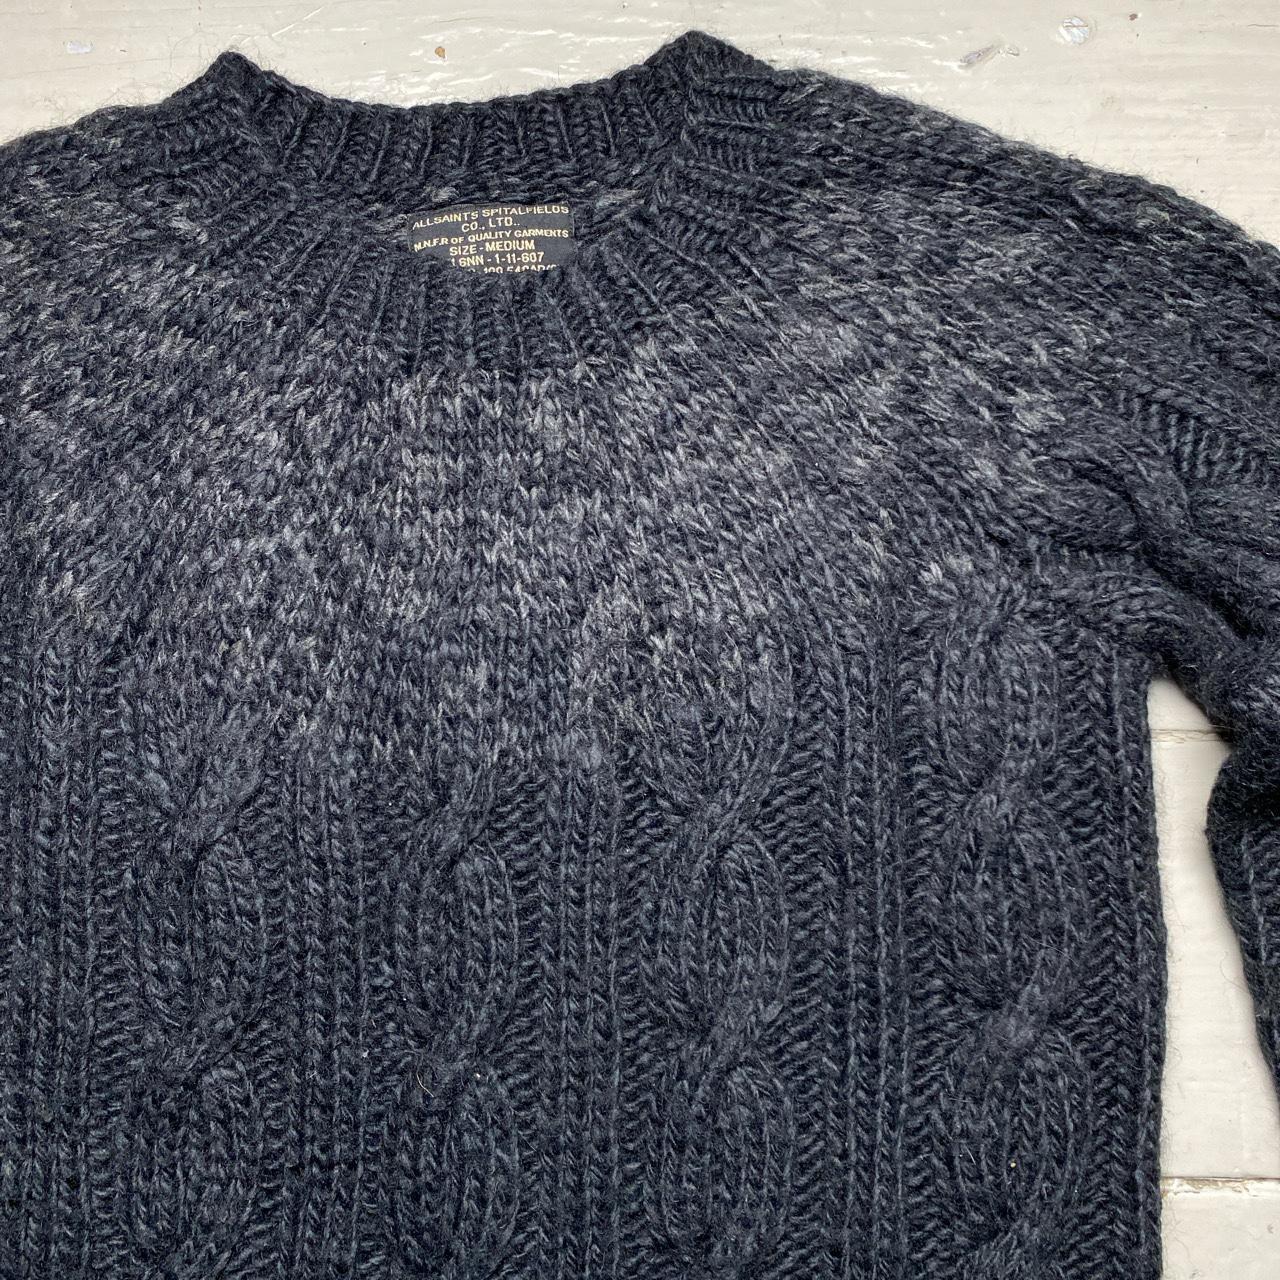 All Saints Black and Grey Thick Knitted Jumper